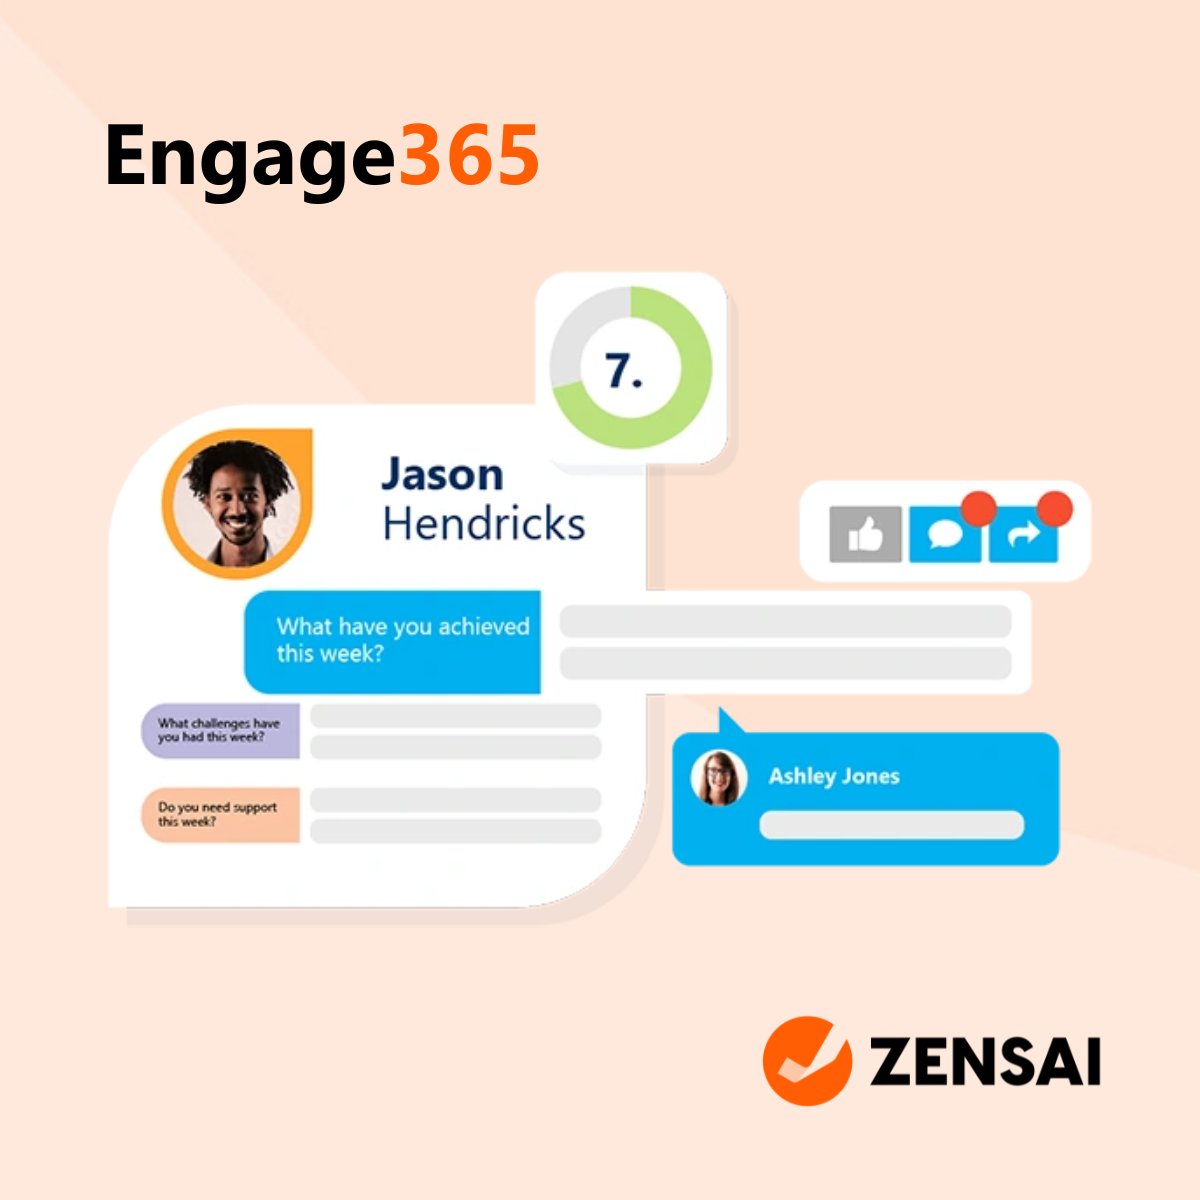 Built for Microsoft 365 and Teams, Engage365 provides a framework for success through everyday support. Foster well-being and aid progress towards employee goals that impact the entire organization. 🚀

Learn more at: hubz.li/Q02t7bm20

#EmployeeEngagement #HumanSuccess